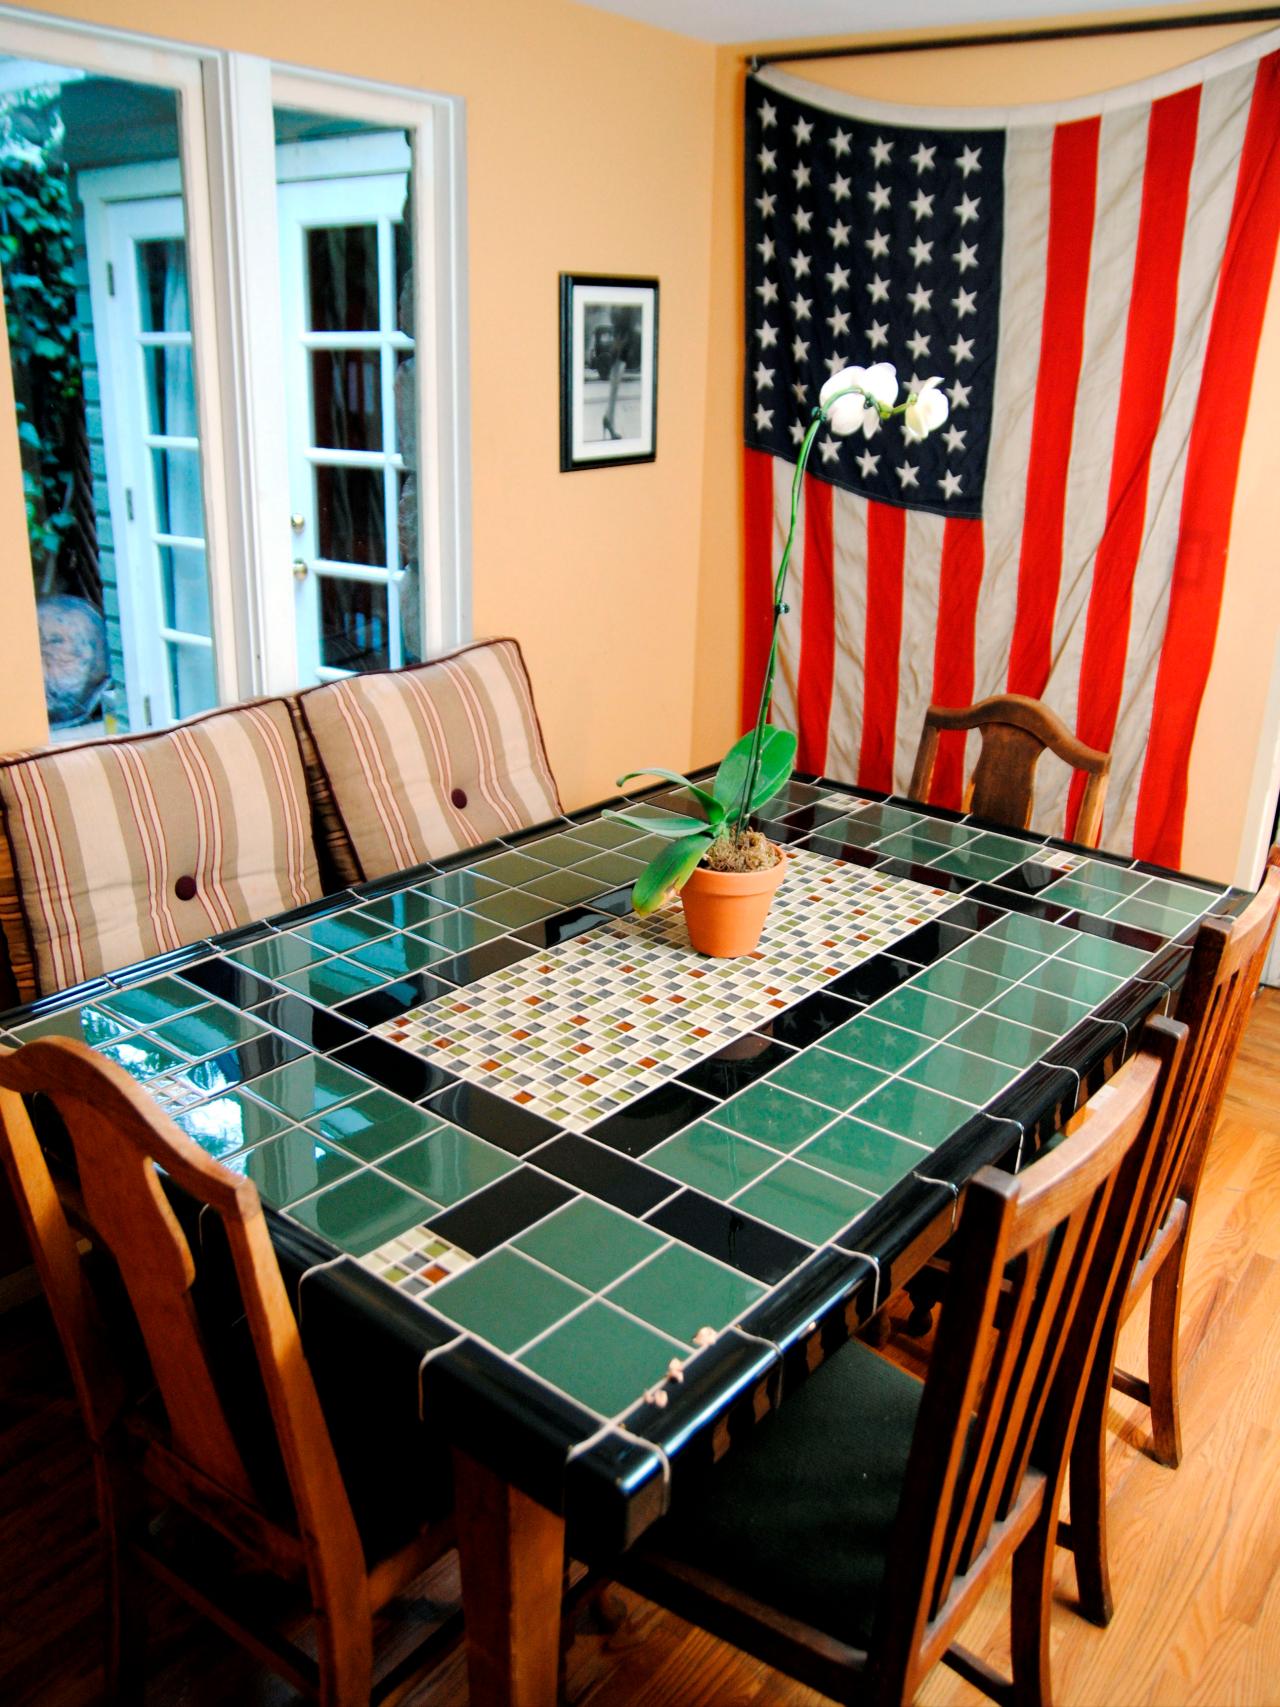 Create A Mosaic Tile Tabletop, Tile Kitchen Table Top